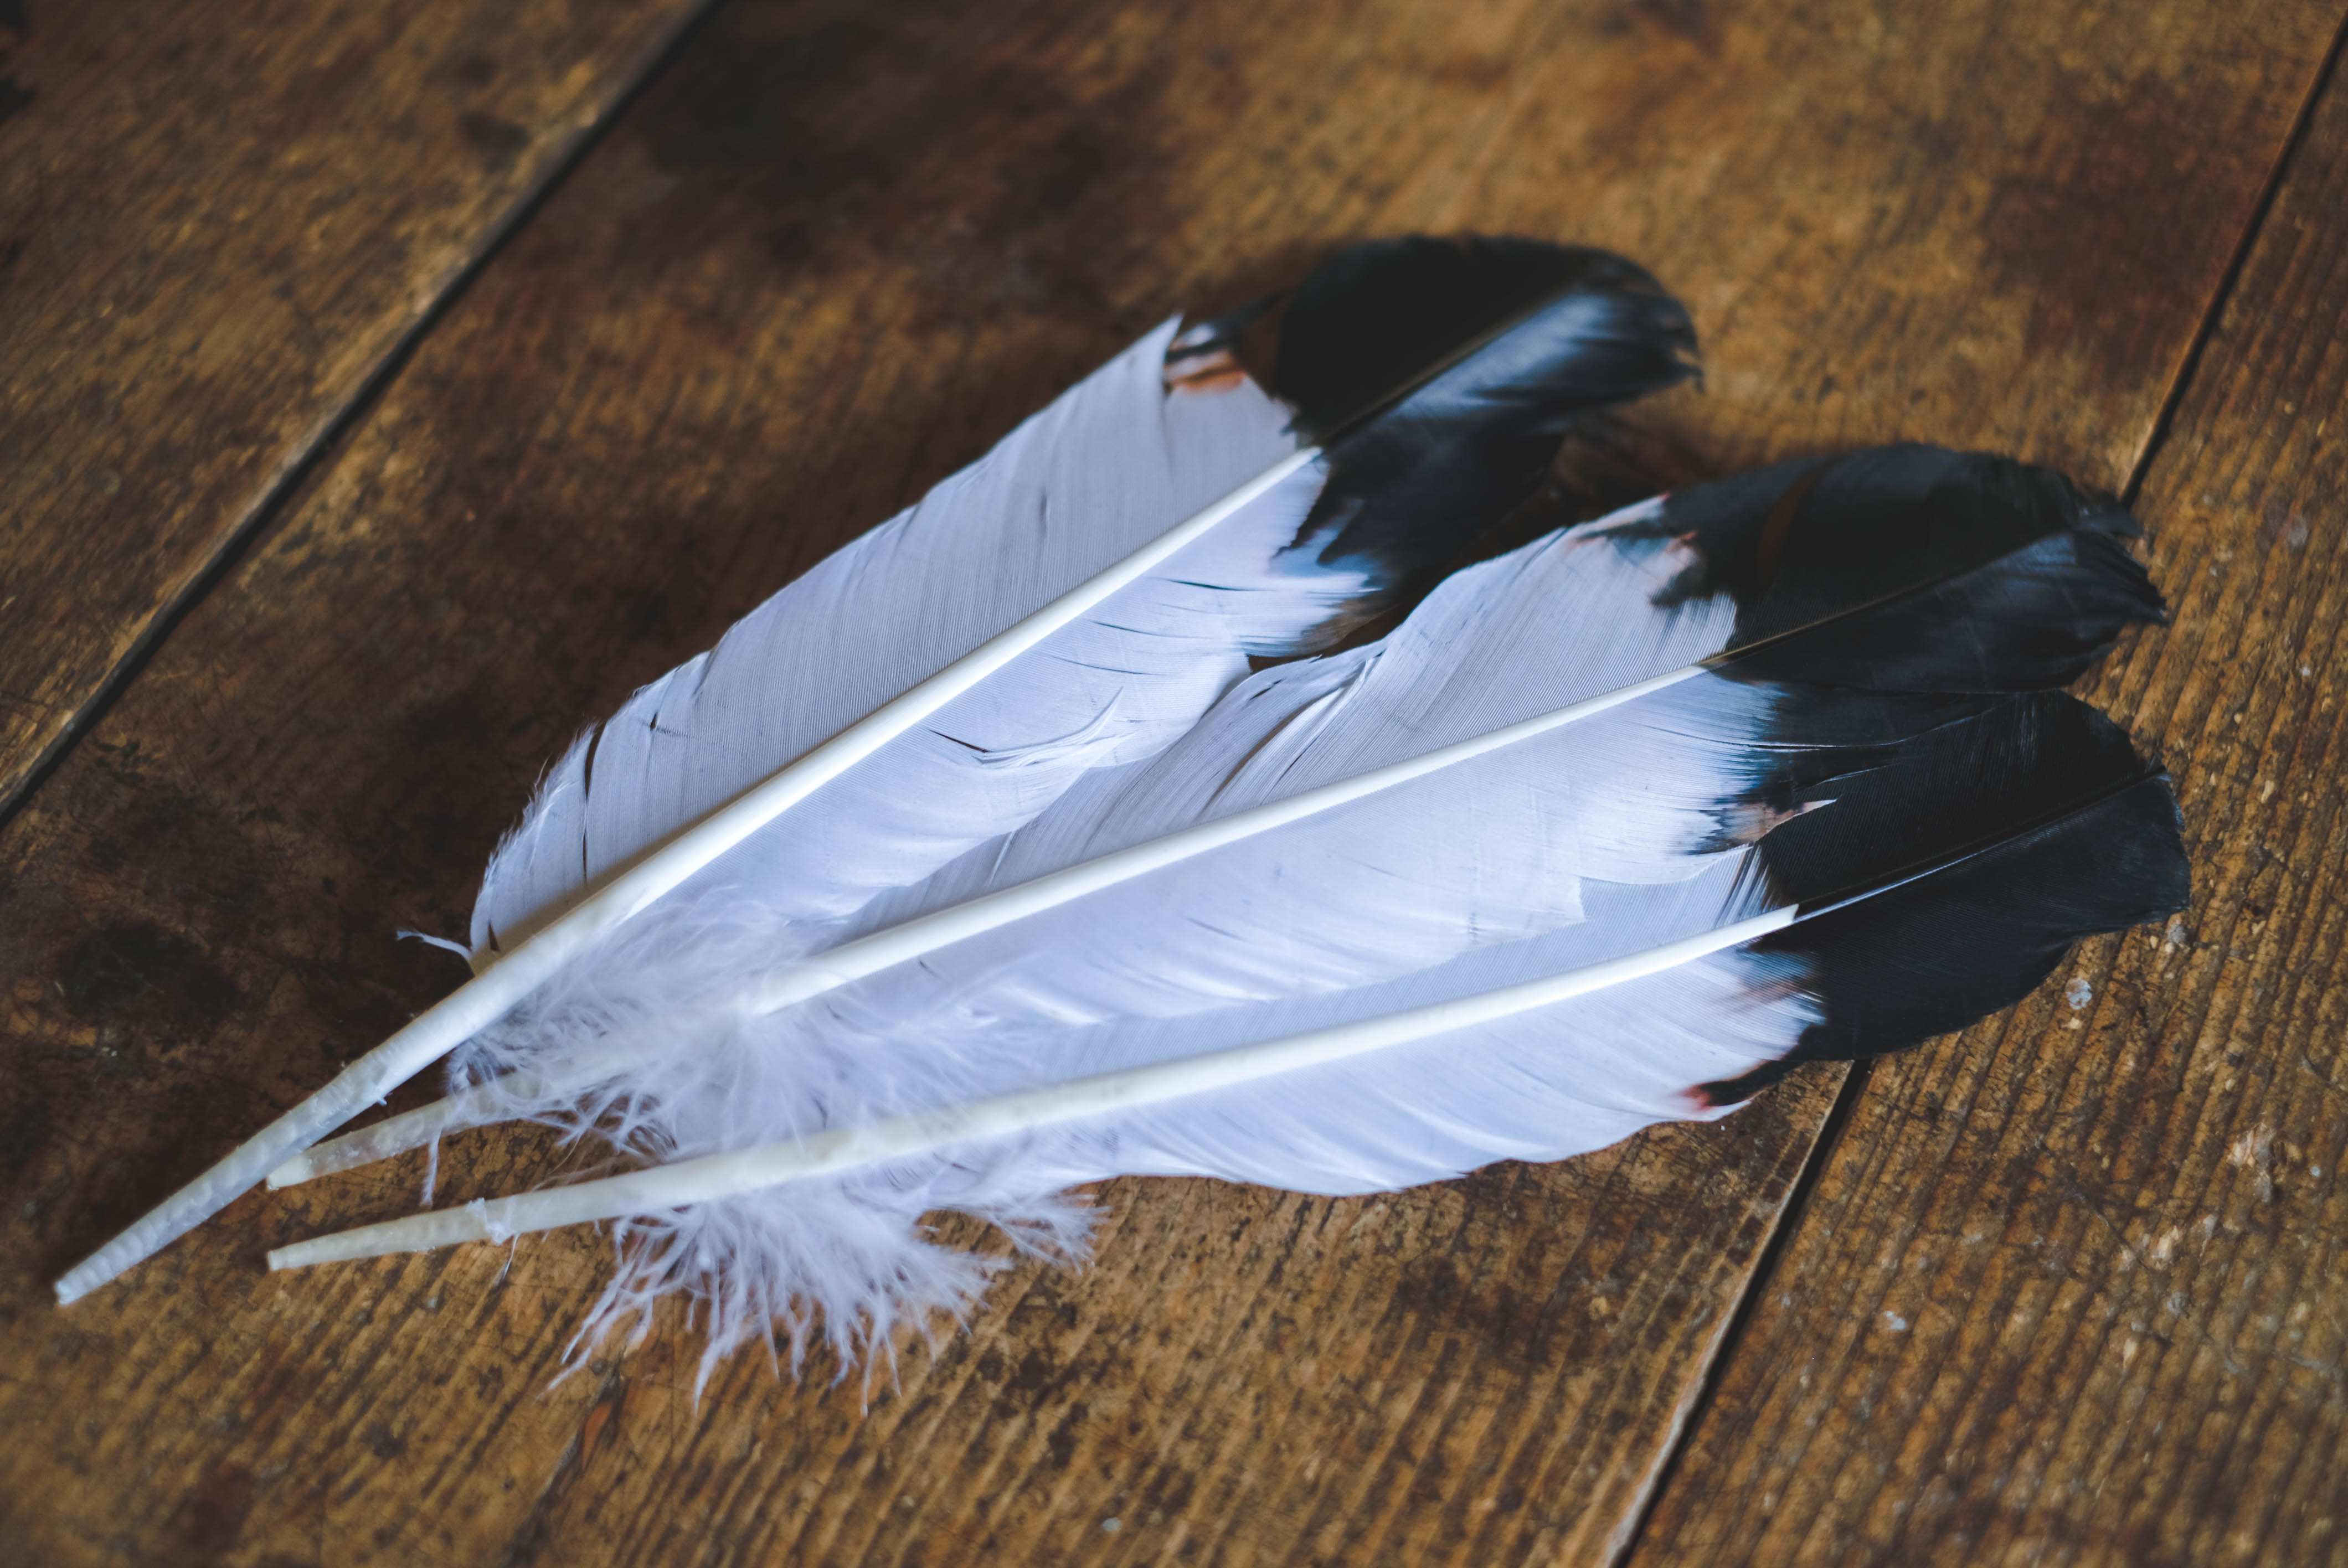 White and black goose feather